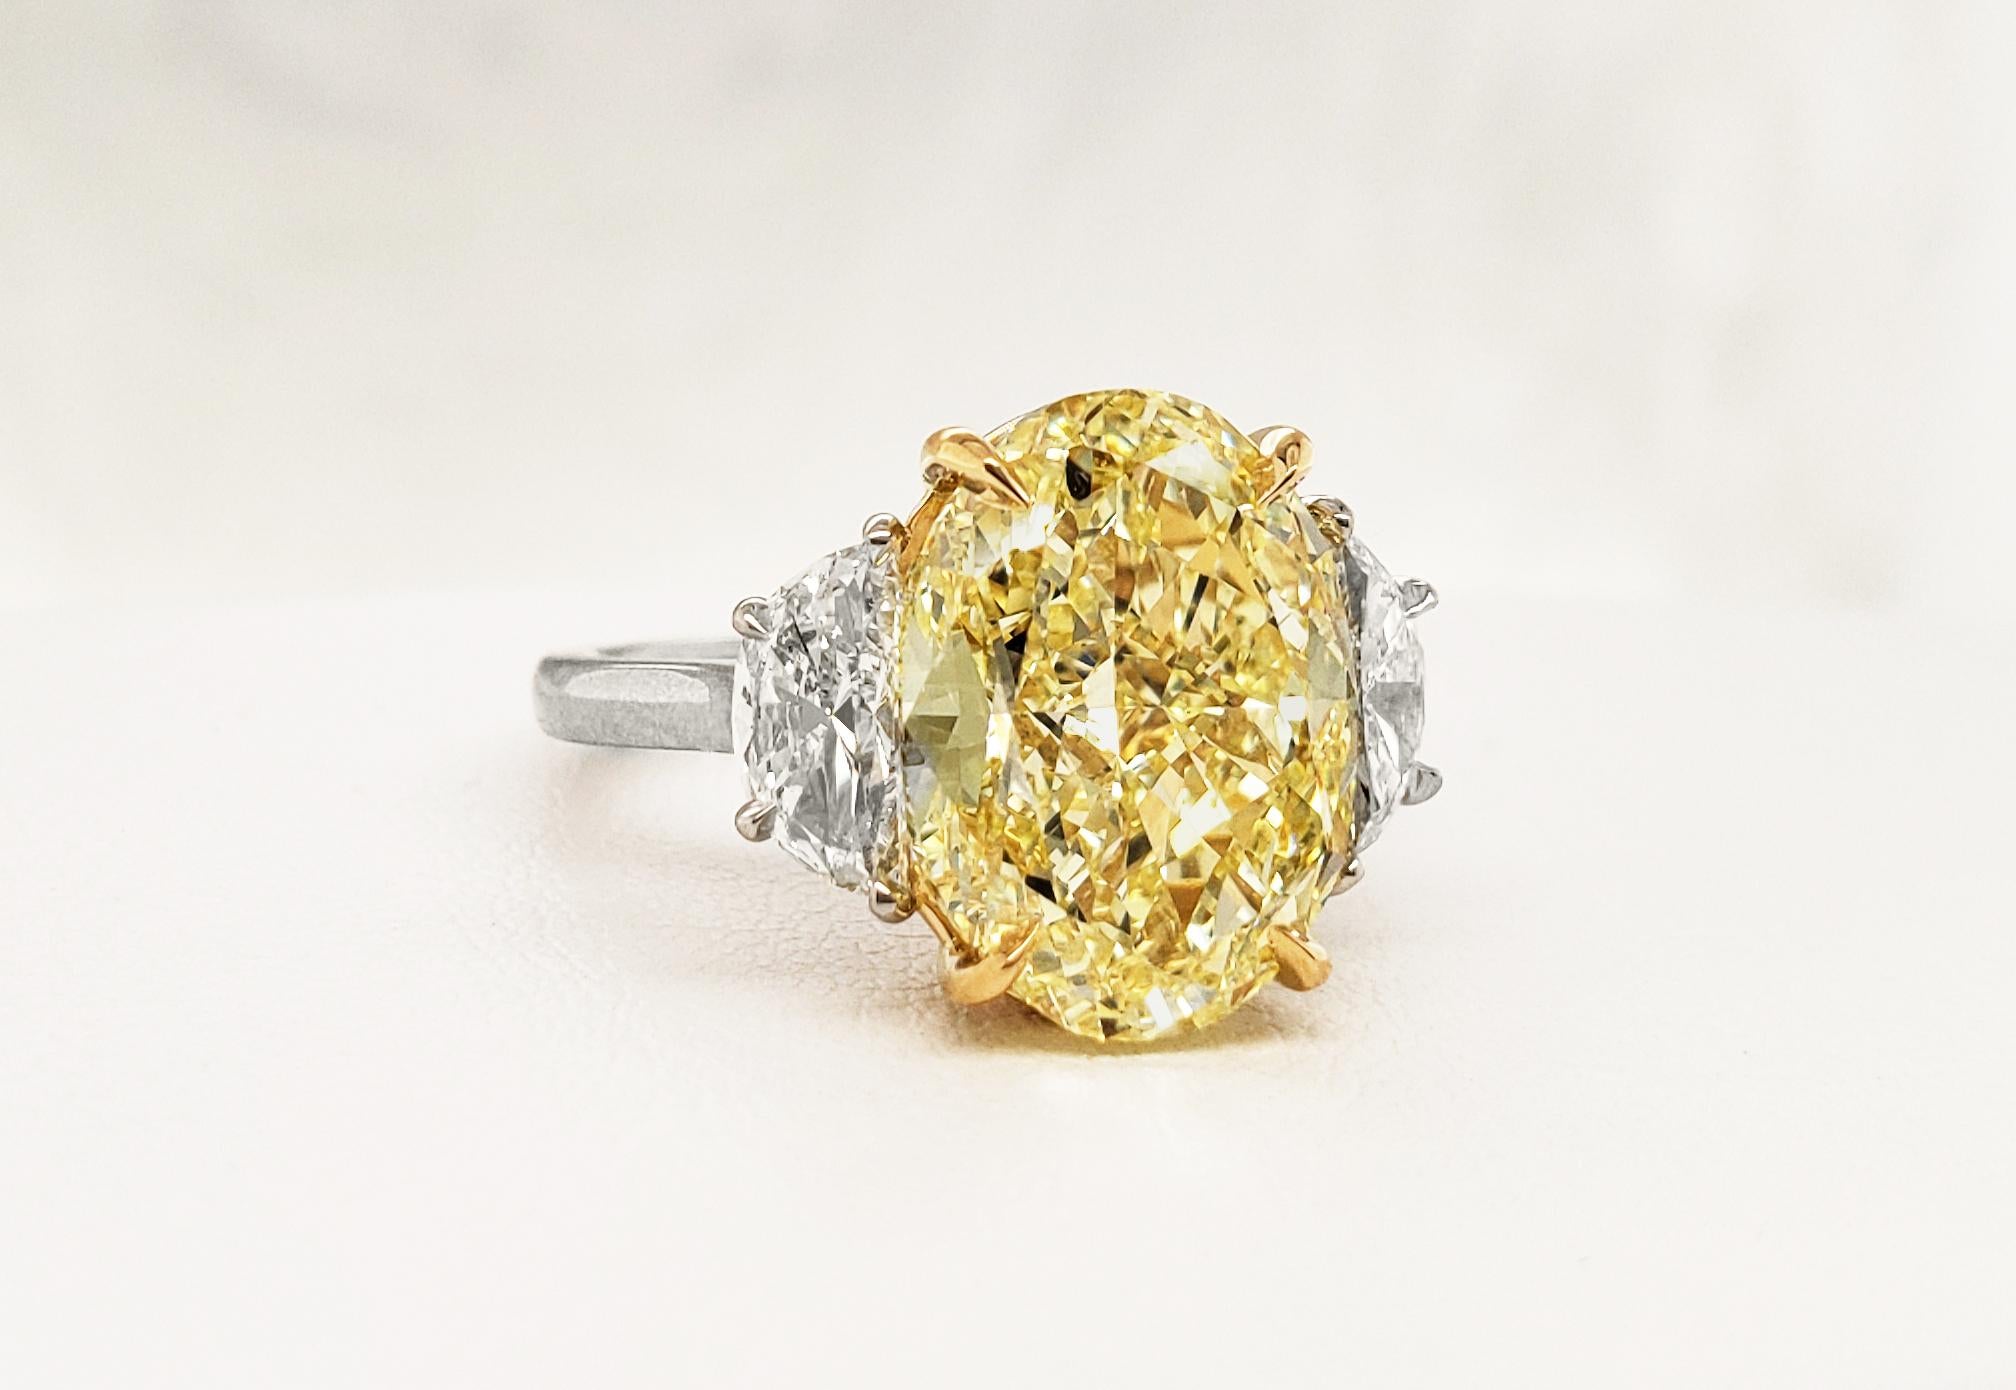 Scarselli's Classic Ring features an 6.70 carat Fancy Yellow Oval Diamond with GIA certificate 6177522925 (see picture for details of the stone) . The center diamond is accompanied by two white half-moon cut diamonds, VS1 clarity 1.00 total carat